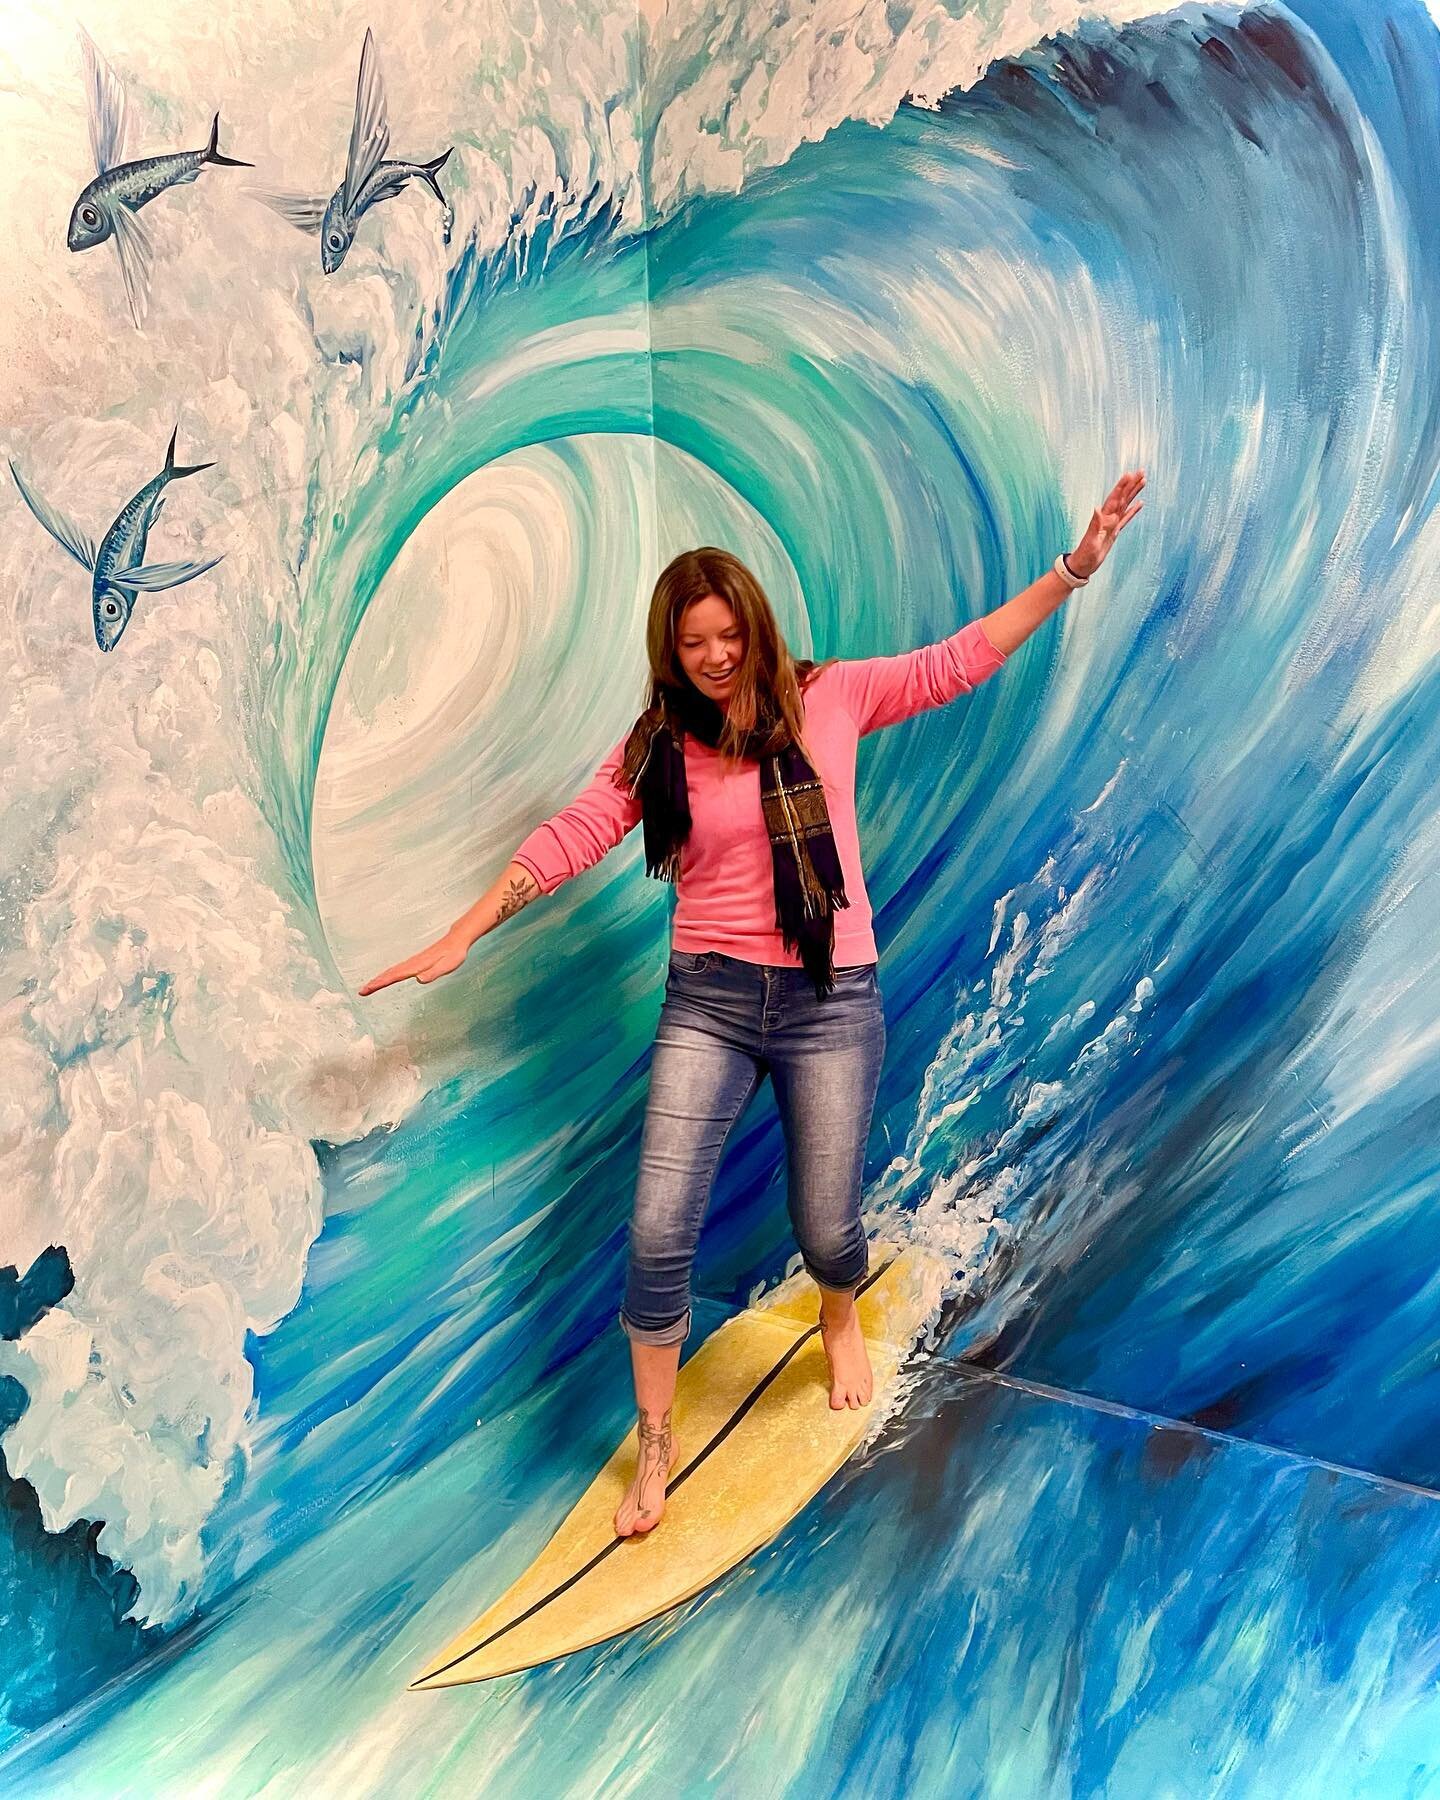 Surfs up! It&rsquo;s Saturday friends 😁 missing you and wishing you a great weekend wherever you might be. 

Another mural I painted for that fun gallery in Gastown @thedimensionsgallery  Go check them out for your next &ldquo;vacation&rdquo; 😉 

#